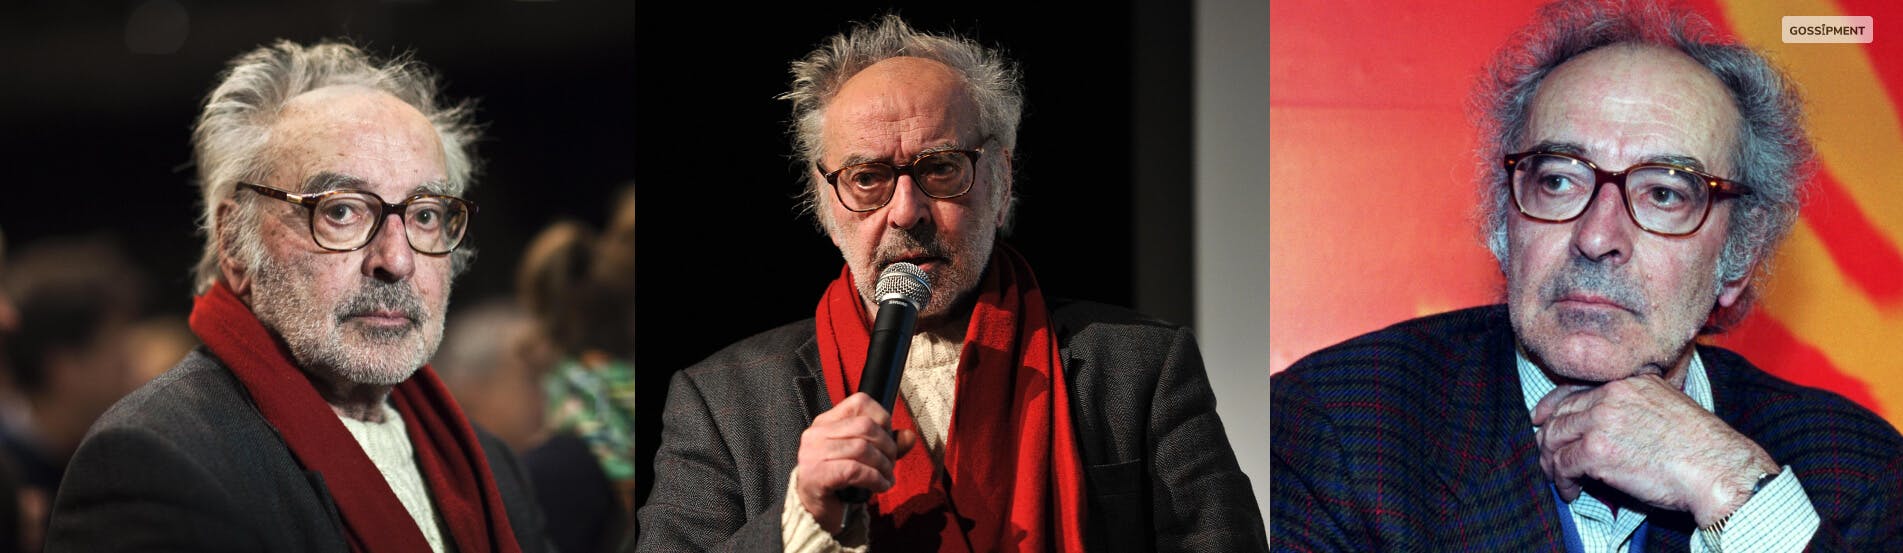 Cover Image for Celebrated French-Swiss Director Godard Dies At 91: The World Of Cinema Is At Mourning